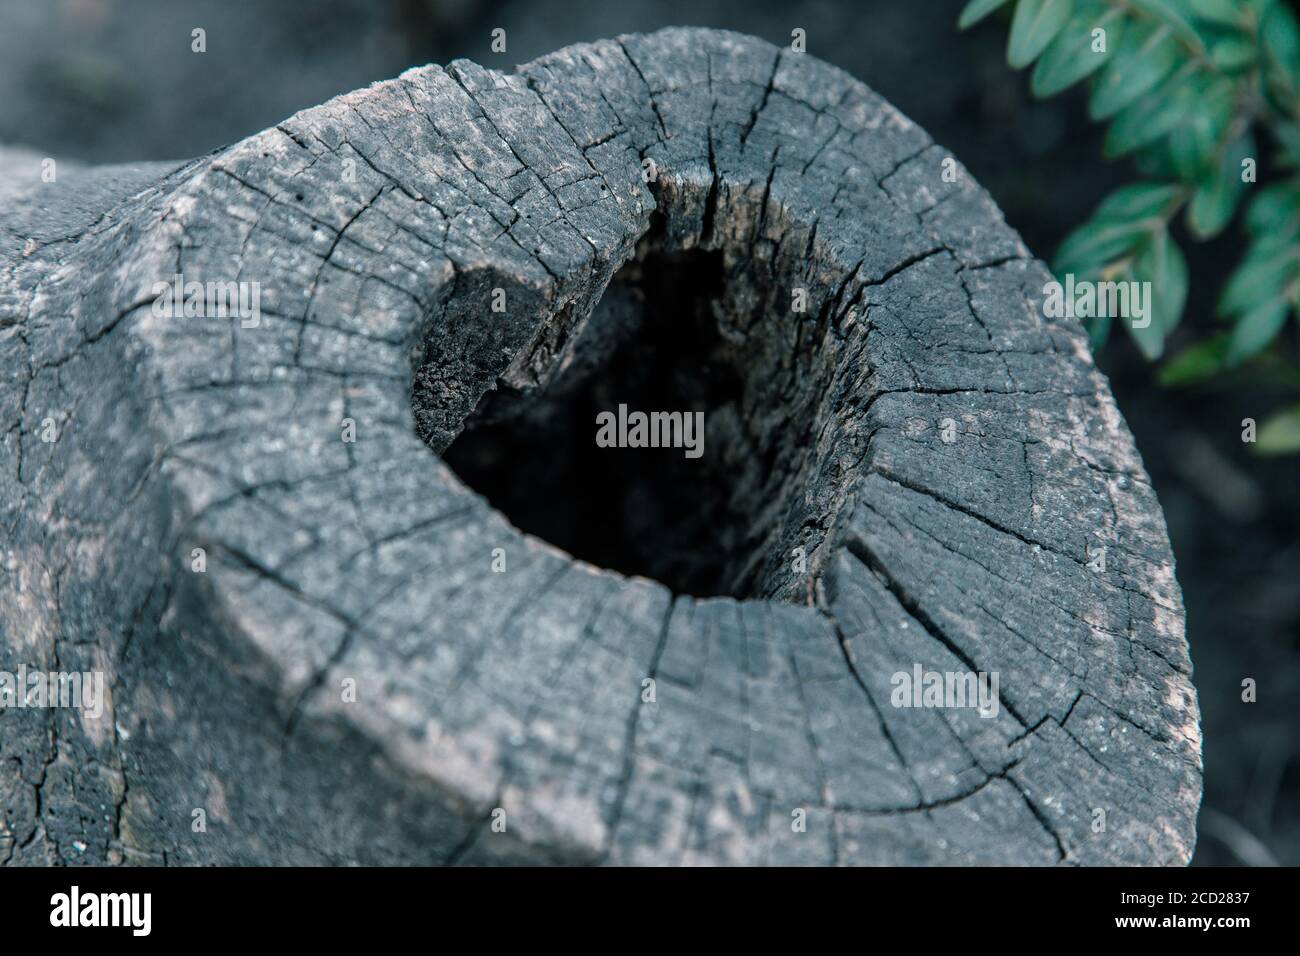 Heart-shaped bird nest in hollow trunk close up Stock Photo